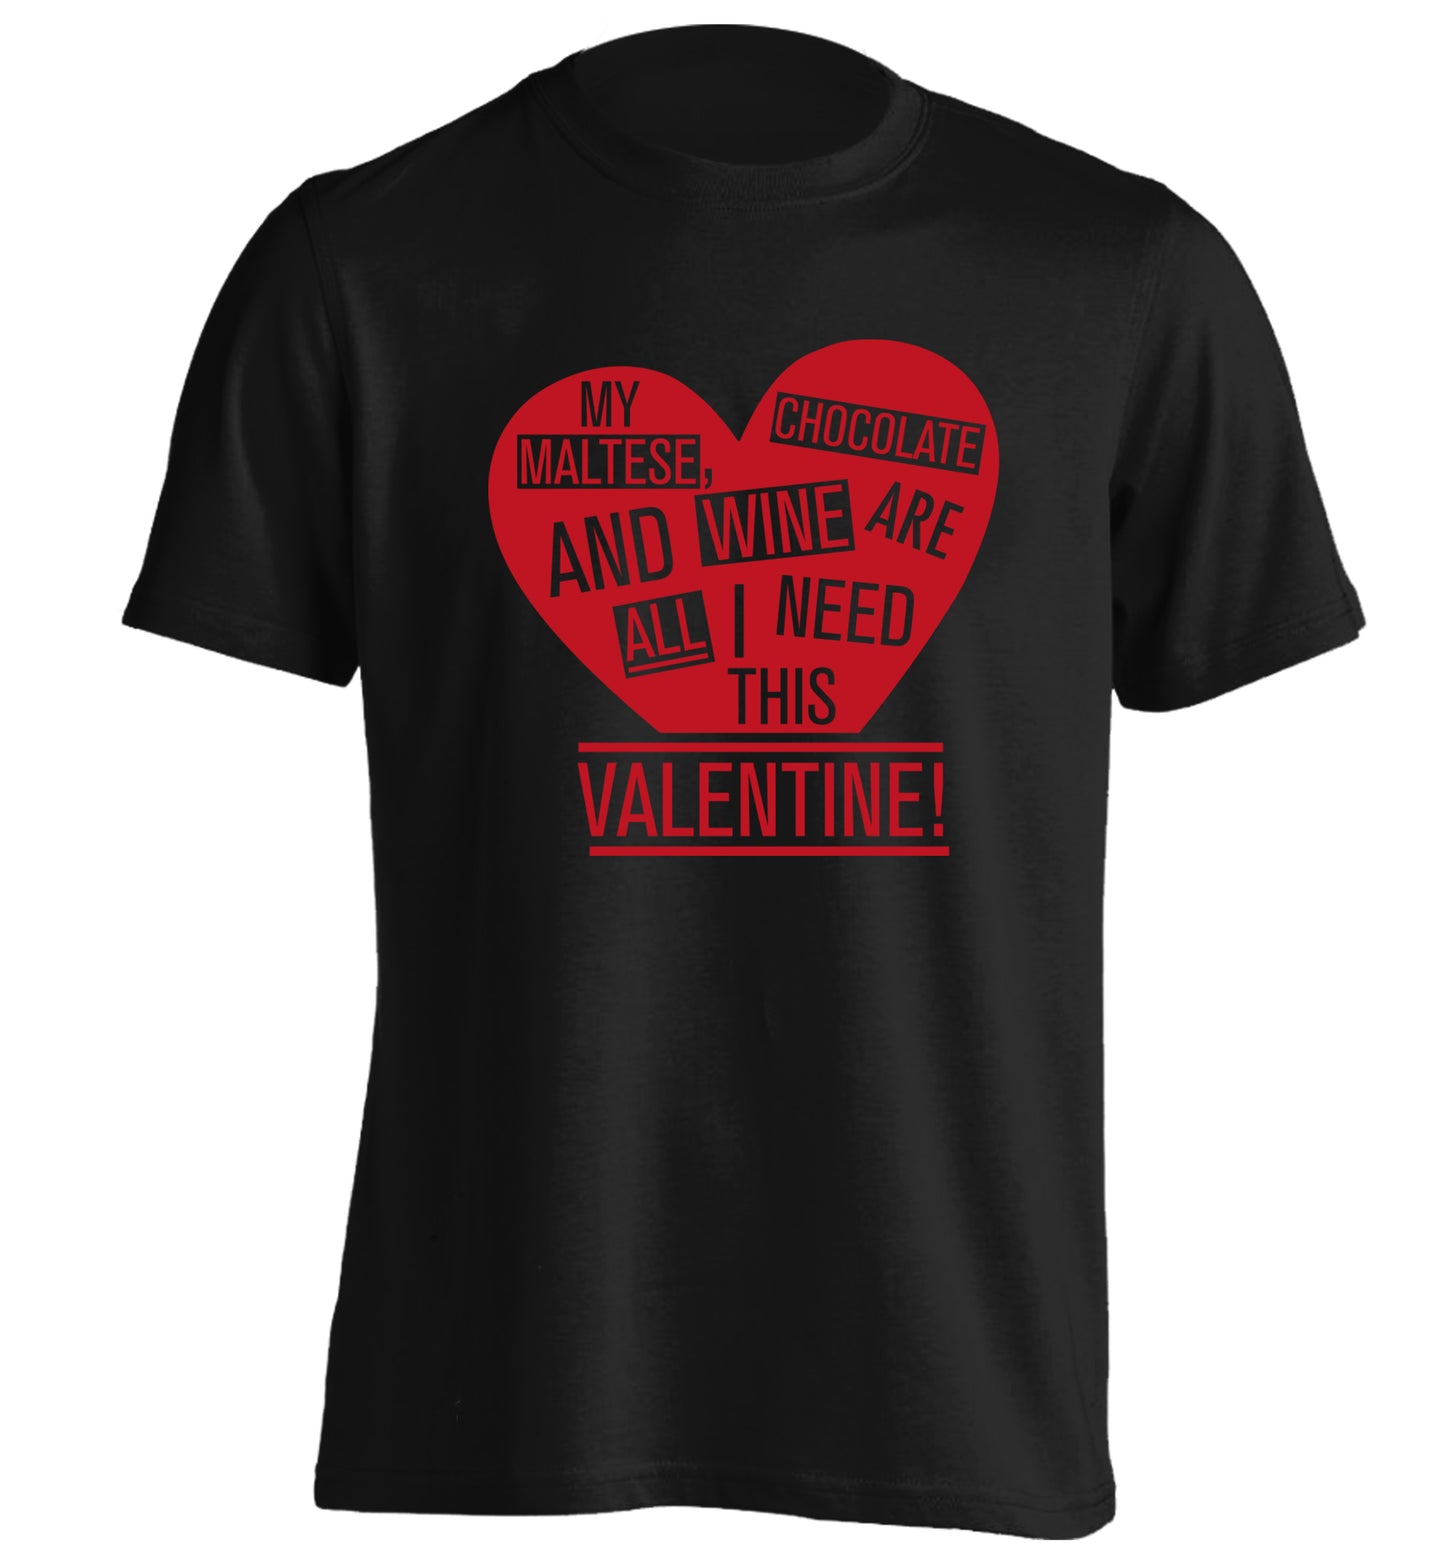 My maltese, chocolate and wine are all I need this valentine! adults unisex black Tshirt 2XL